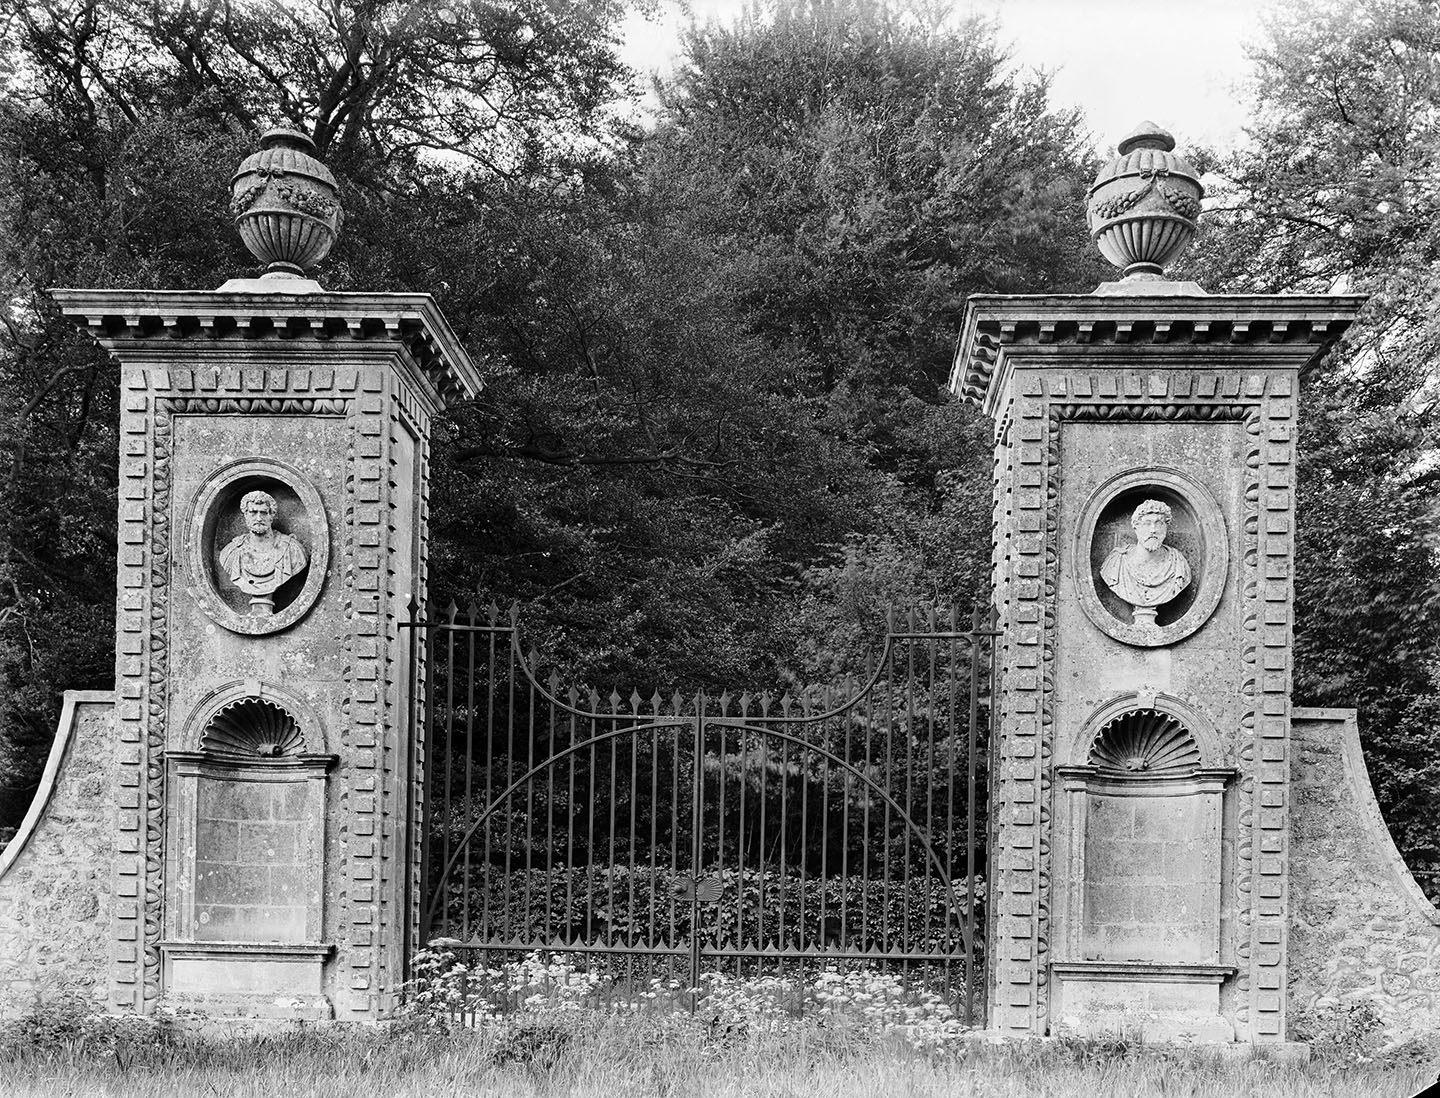 View of 17th-century gate piers which still stand at Coleshill Park.